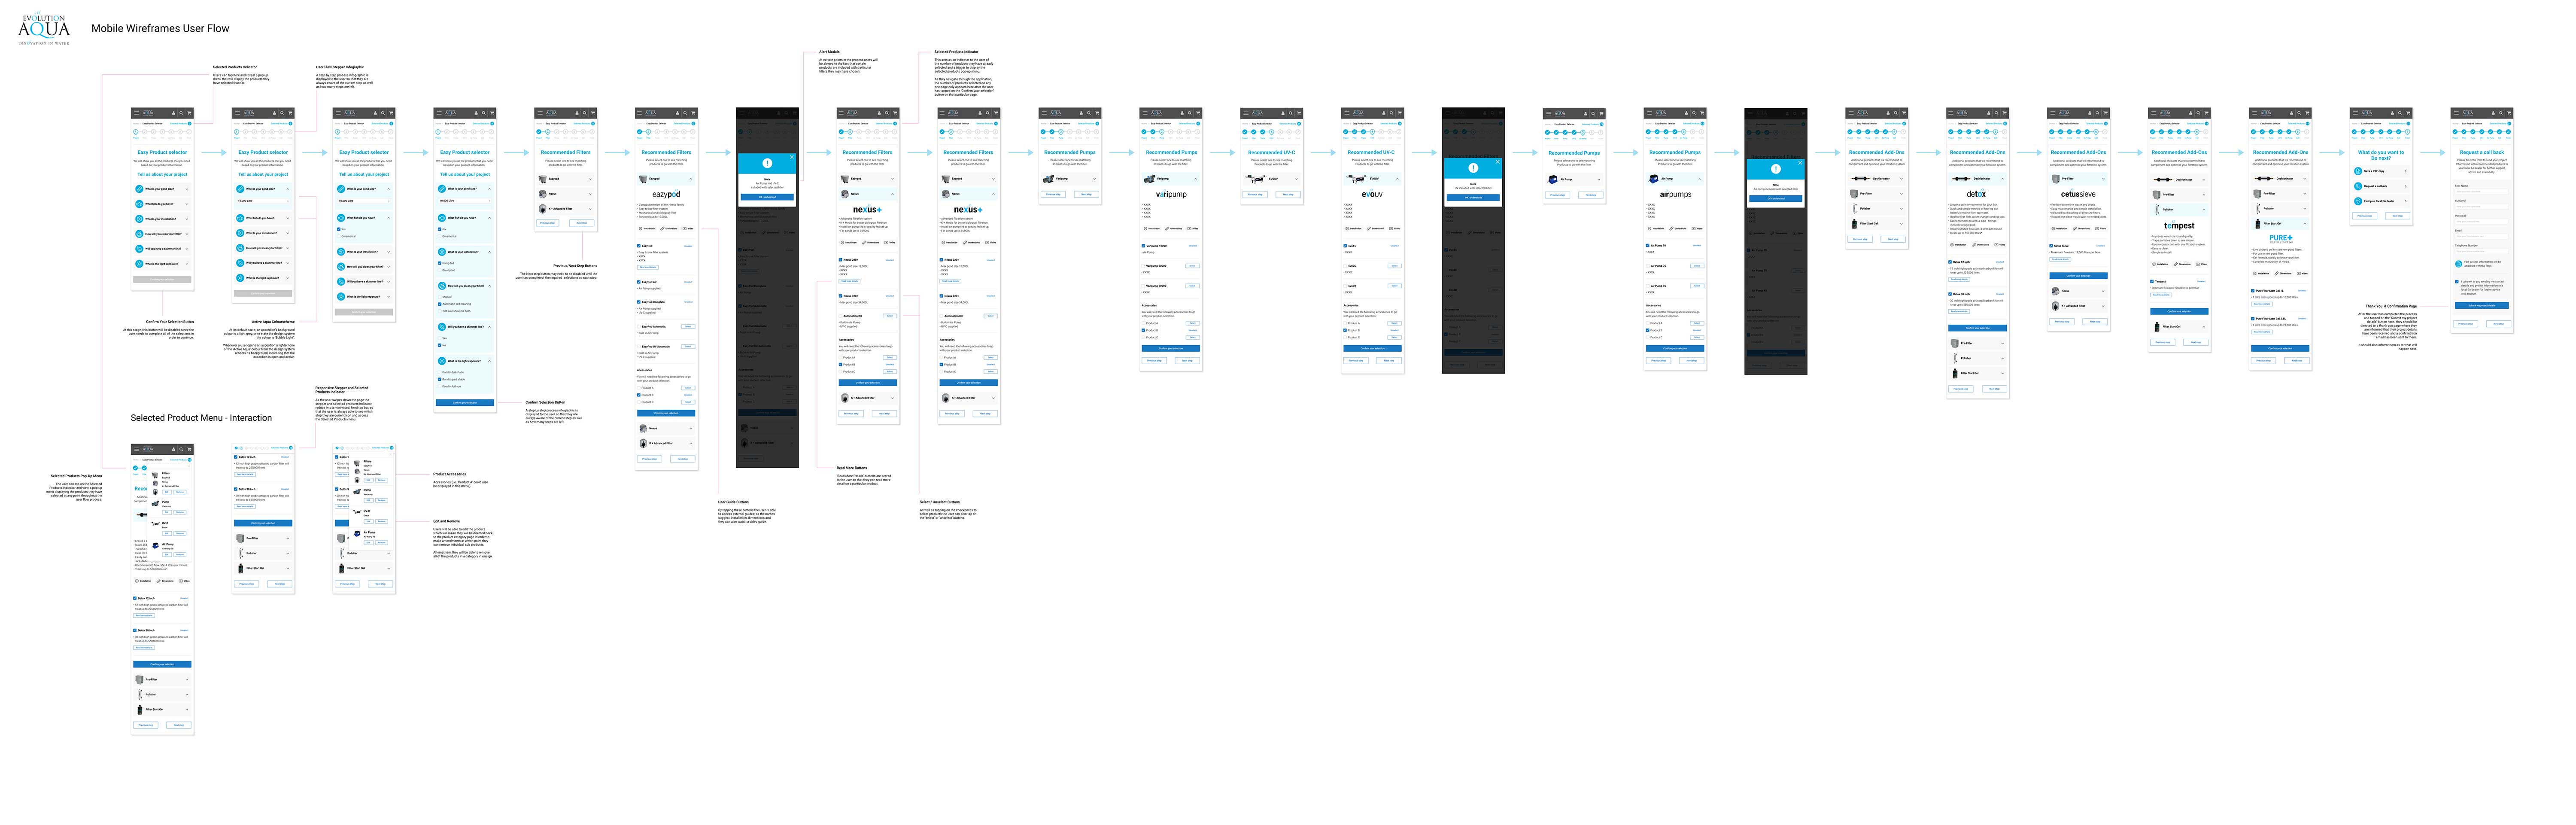 Image of the final annotated presentation PDF shoing the mobile wireframes.